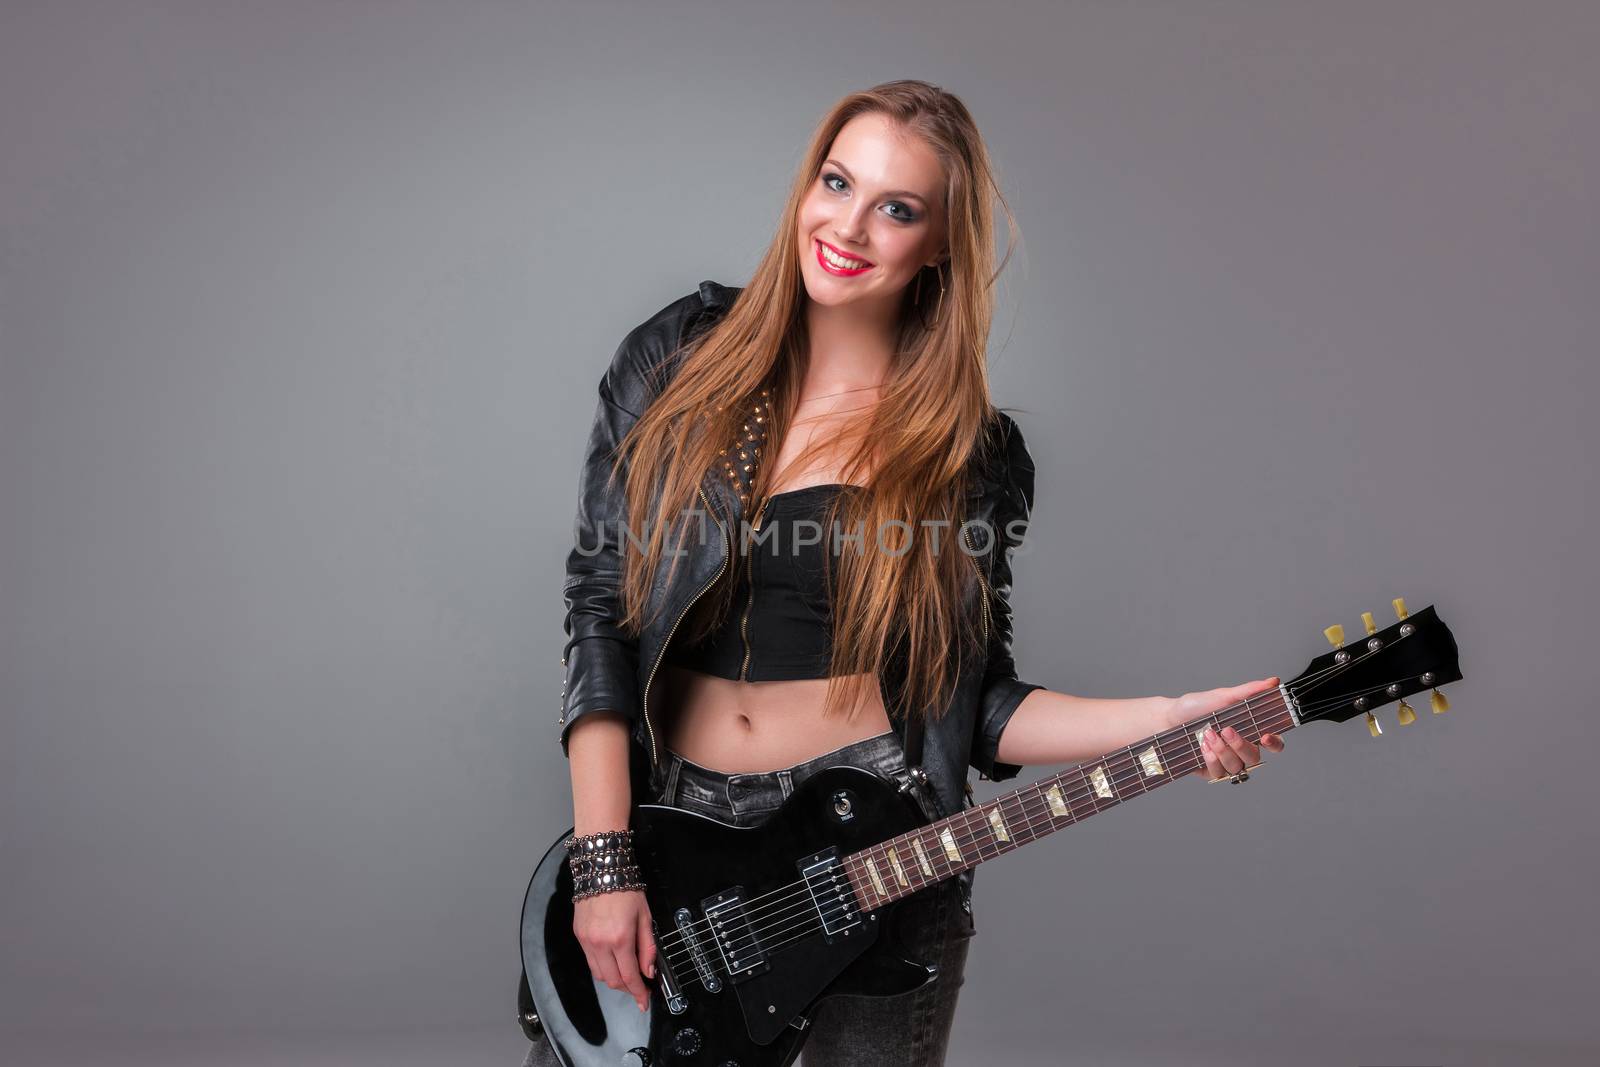 Beautiful girl  with long hair playing guitar in rock style on a gray background